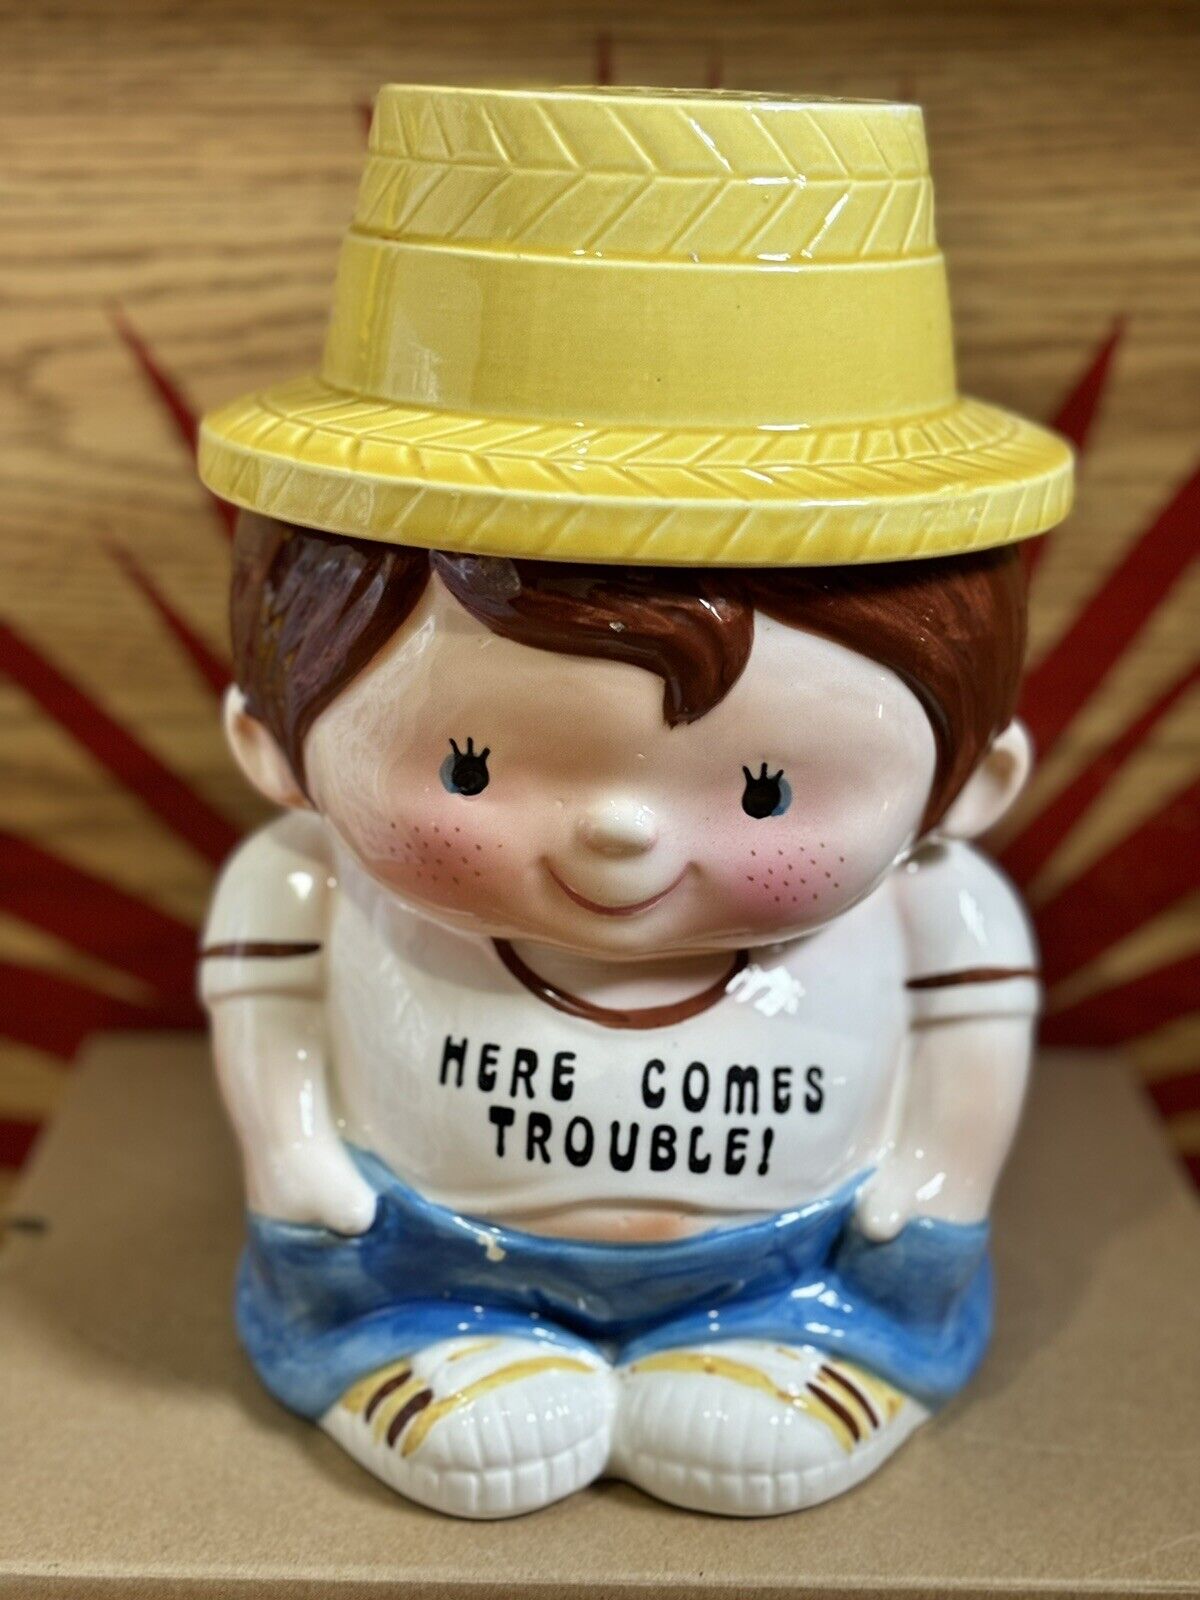 Extremely Rare Vintage Enesco Japan BOY ‘Here Comes Trouble’ Cookie Jar